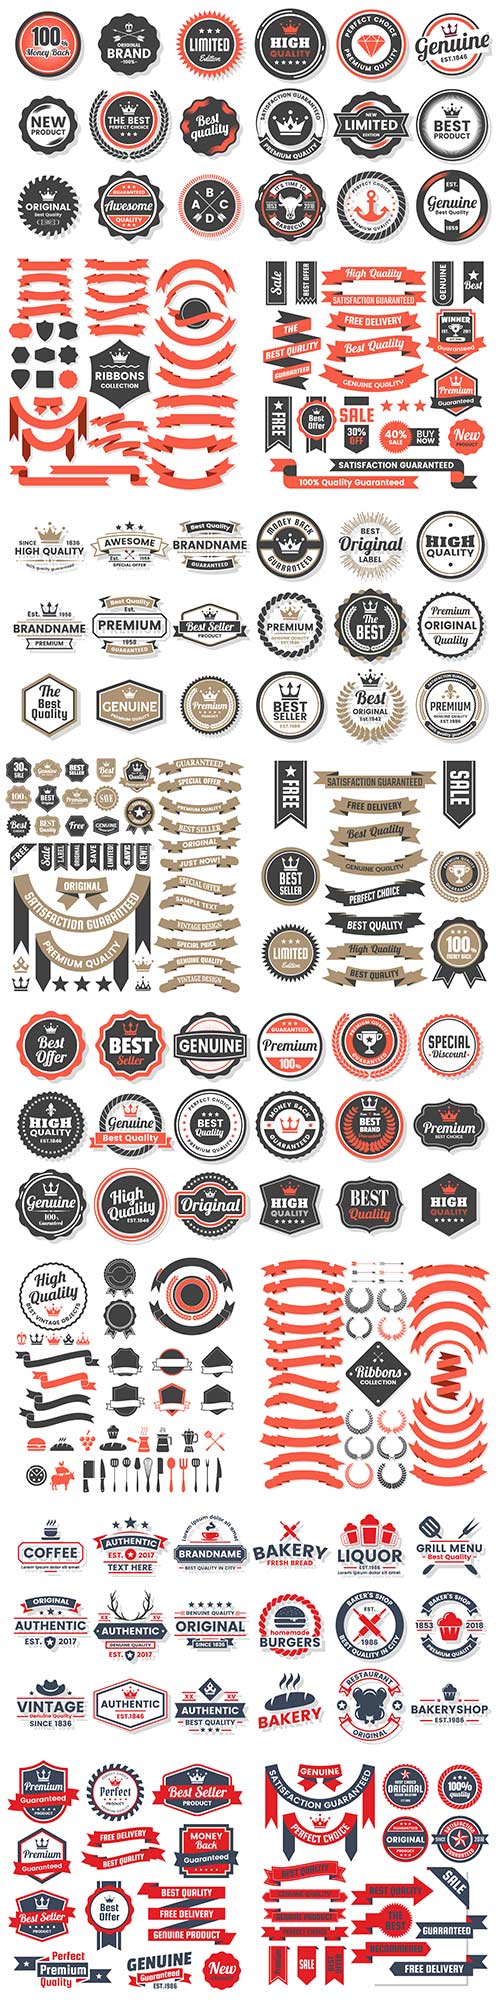 Vintage ribbons labels stickers and logos in vector